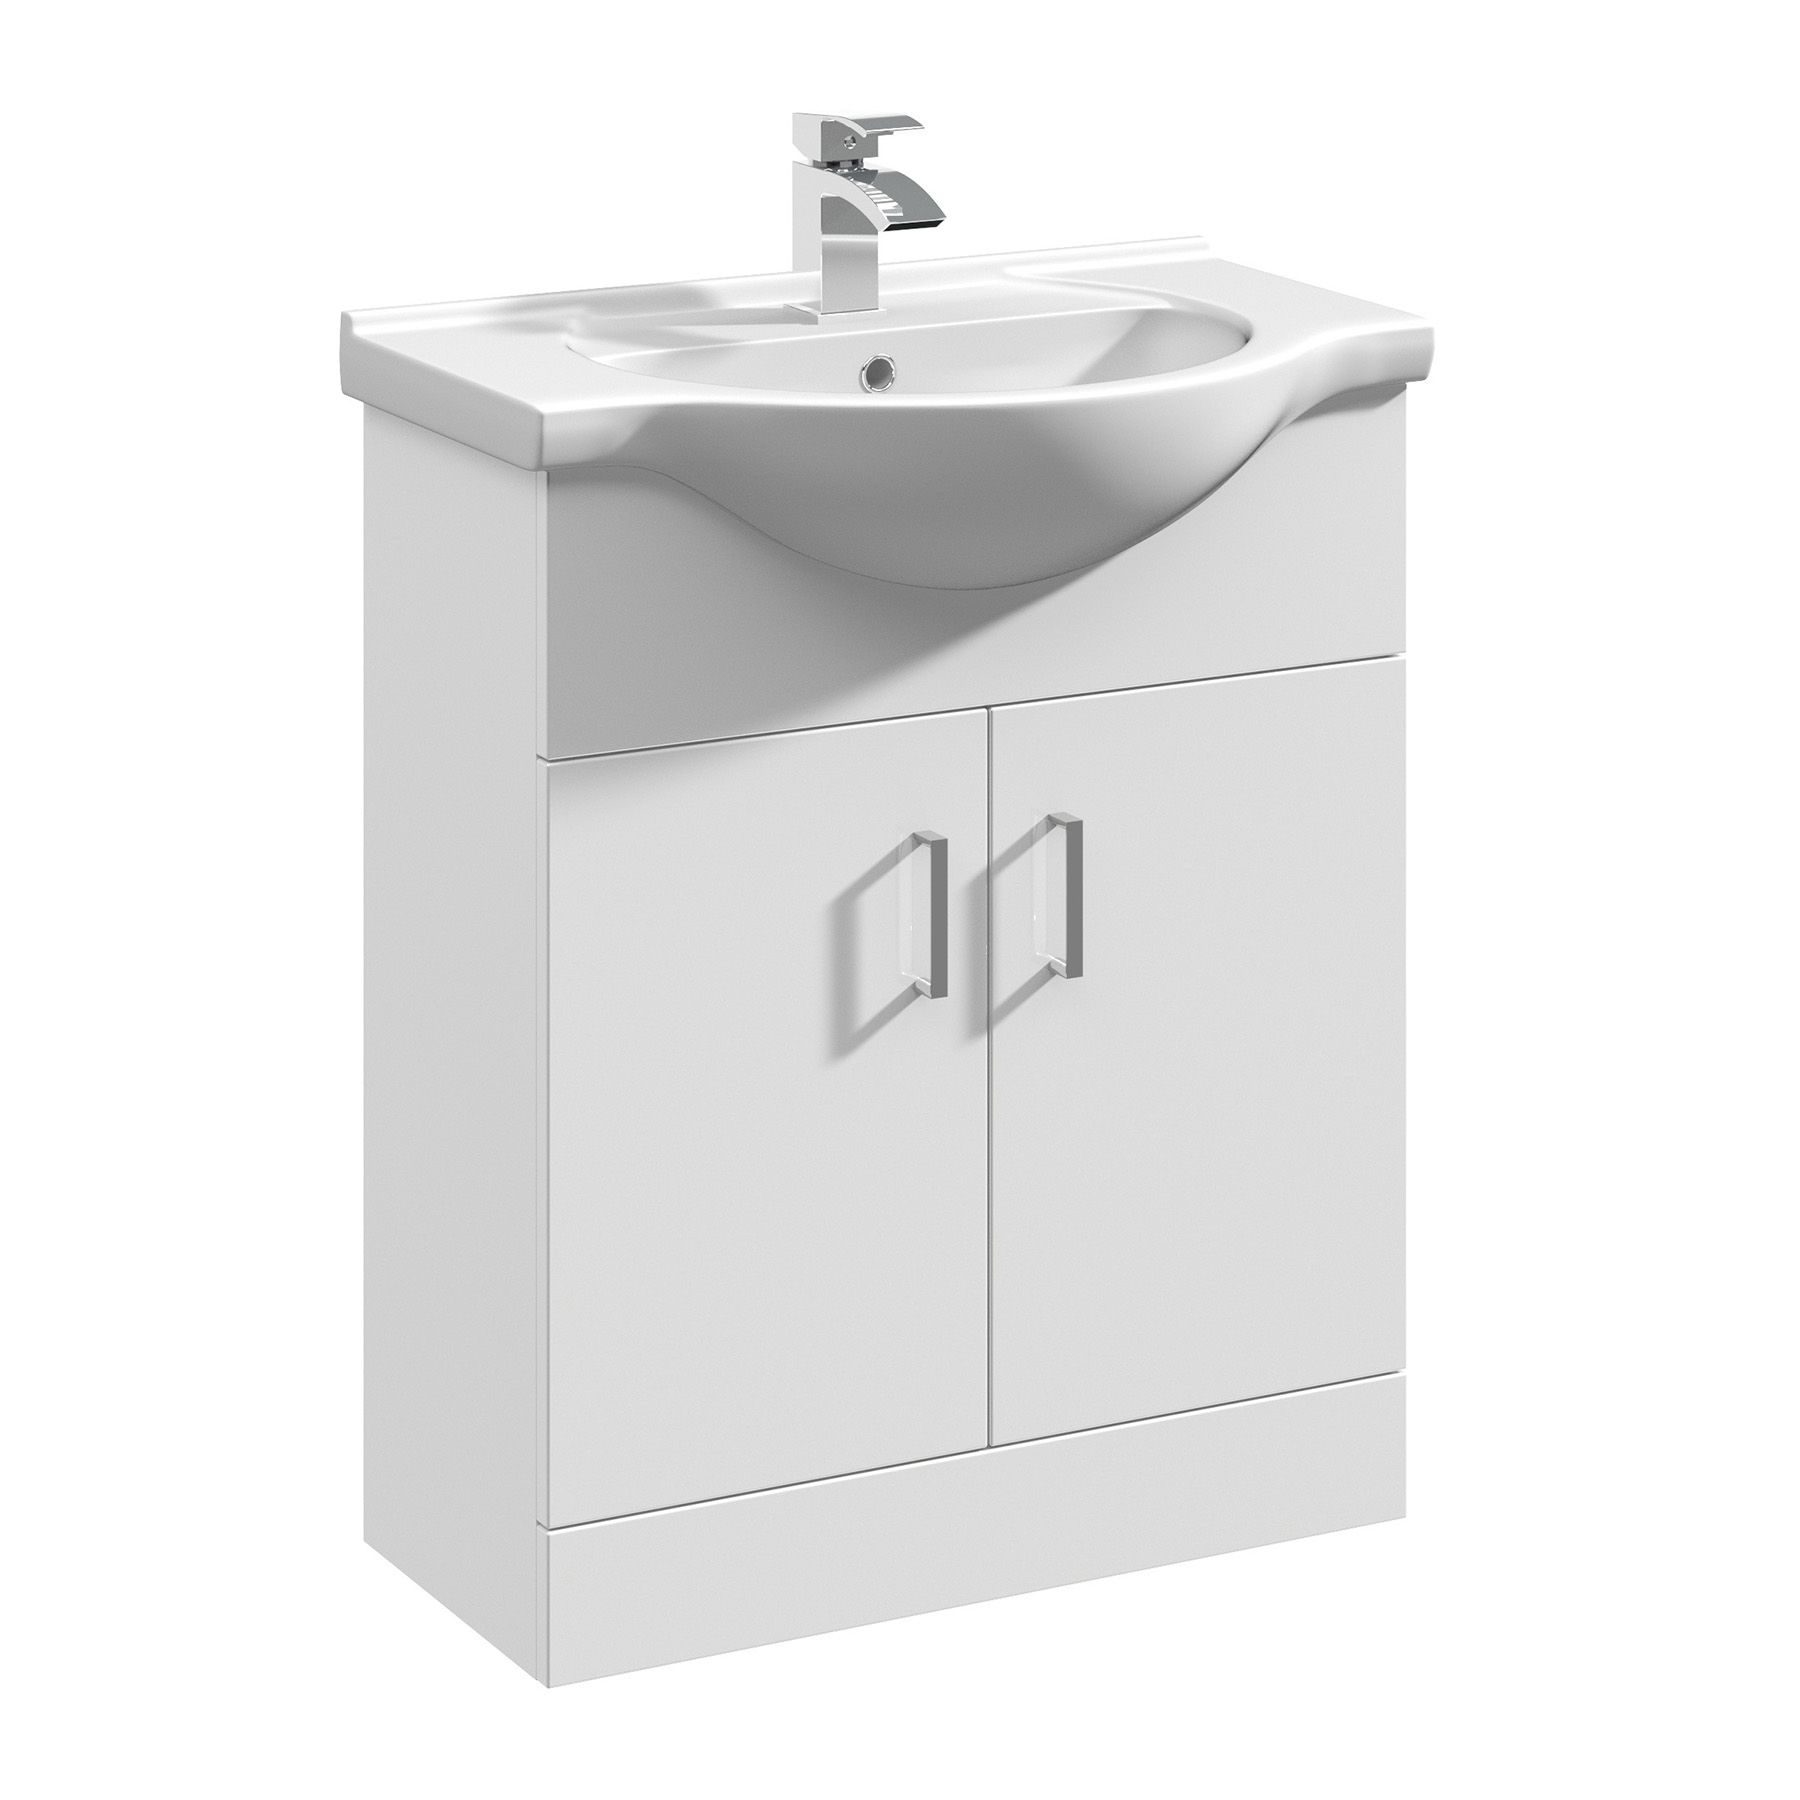 Mayford-650mm-Wide-Floor-Standing-Cabinet-and-Basin_nbc003-main